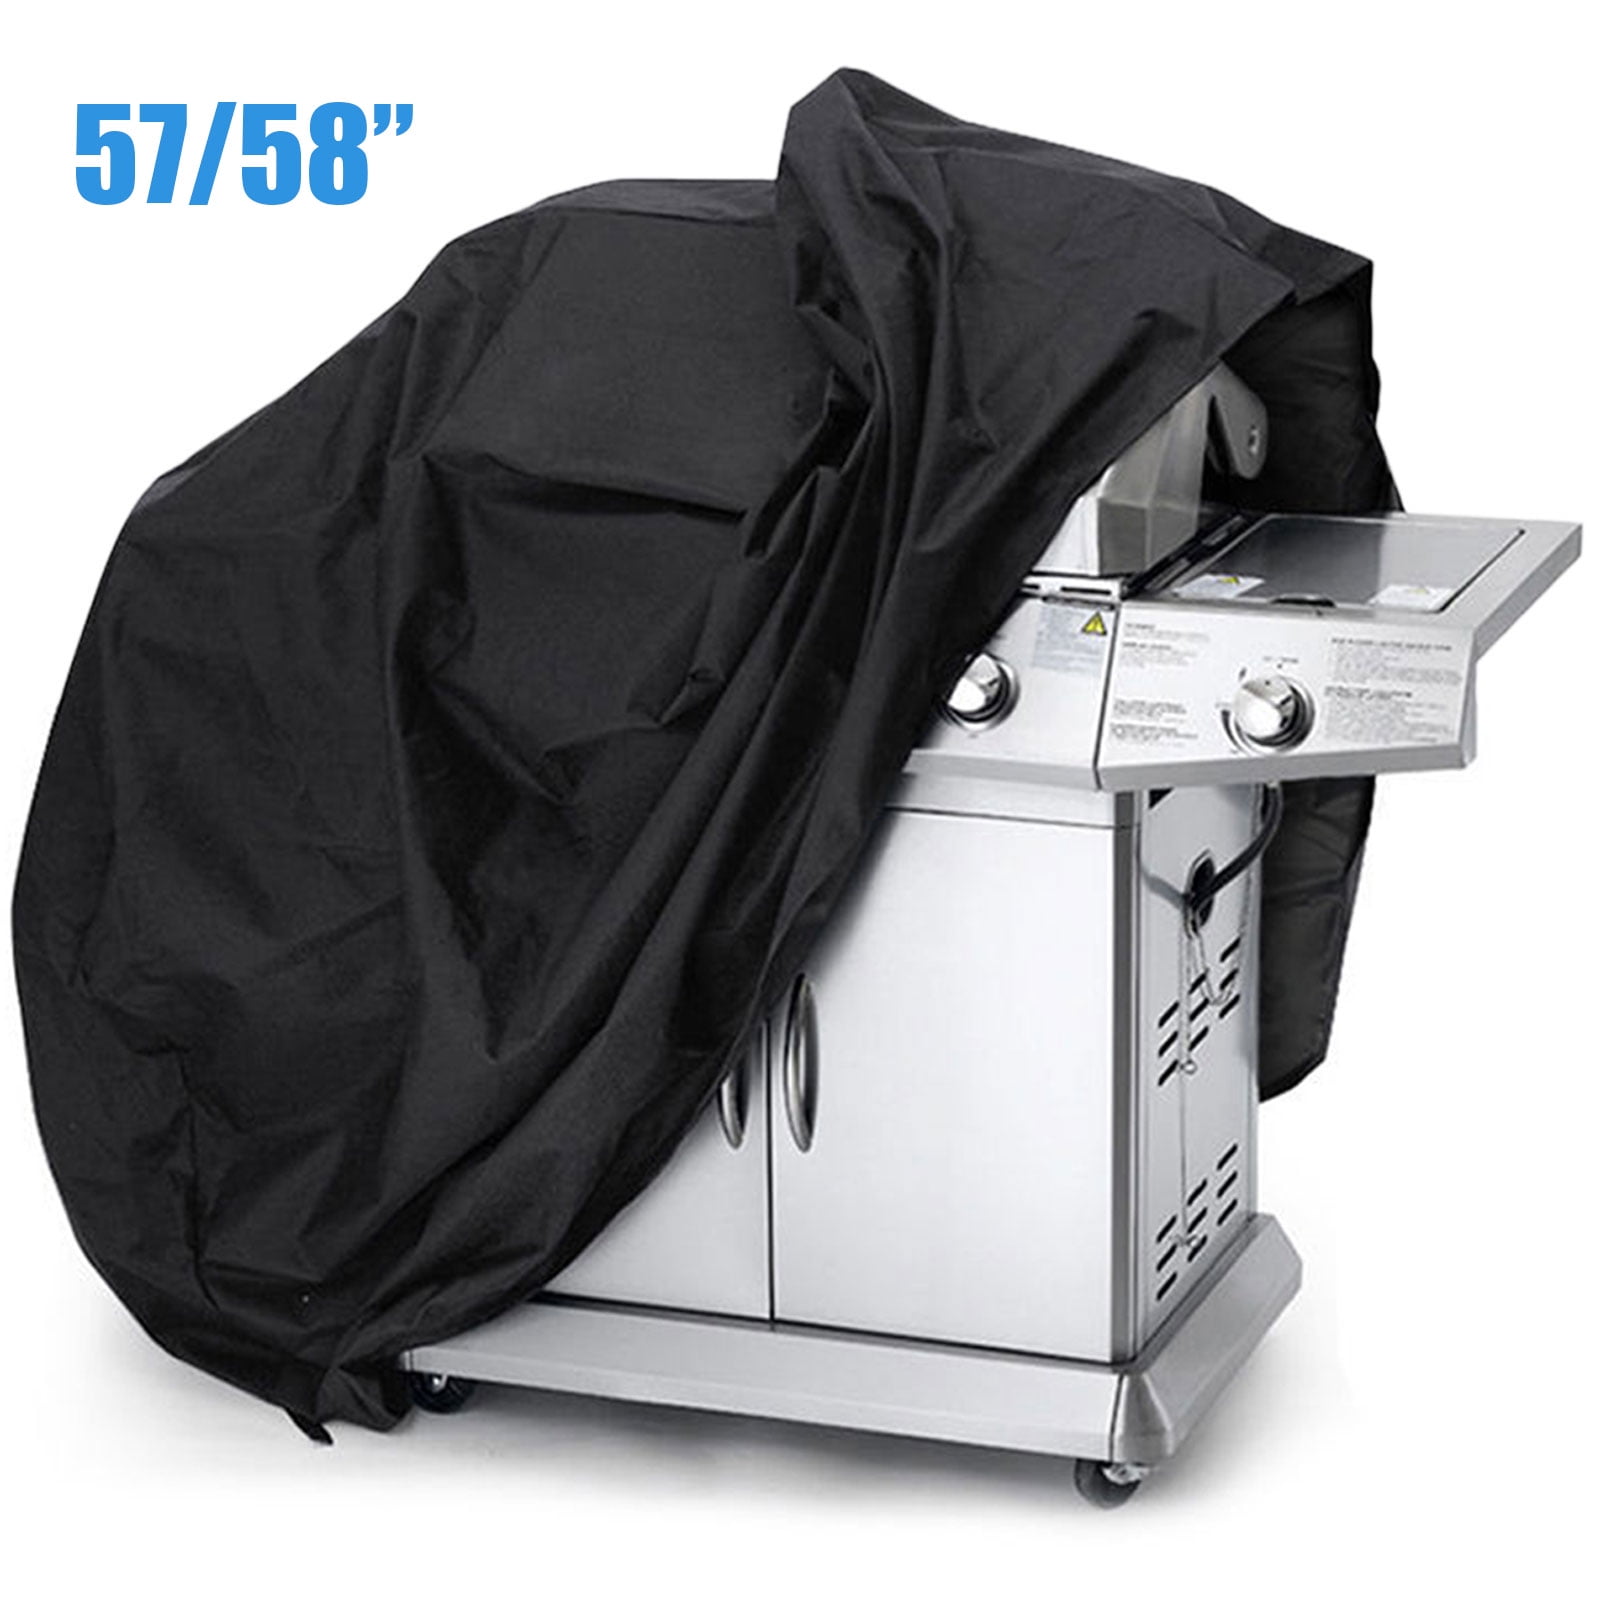 Gas Grill Barbecue BBQ Cover Protection Patio Outdoor Waterproof GL257G GRAY 